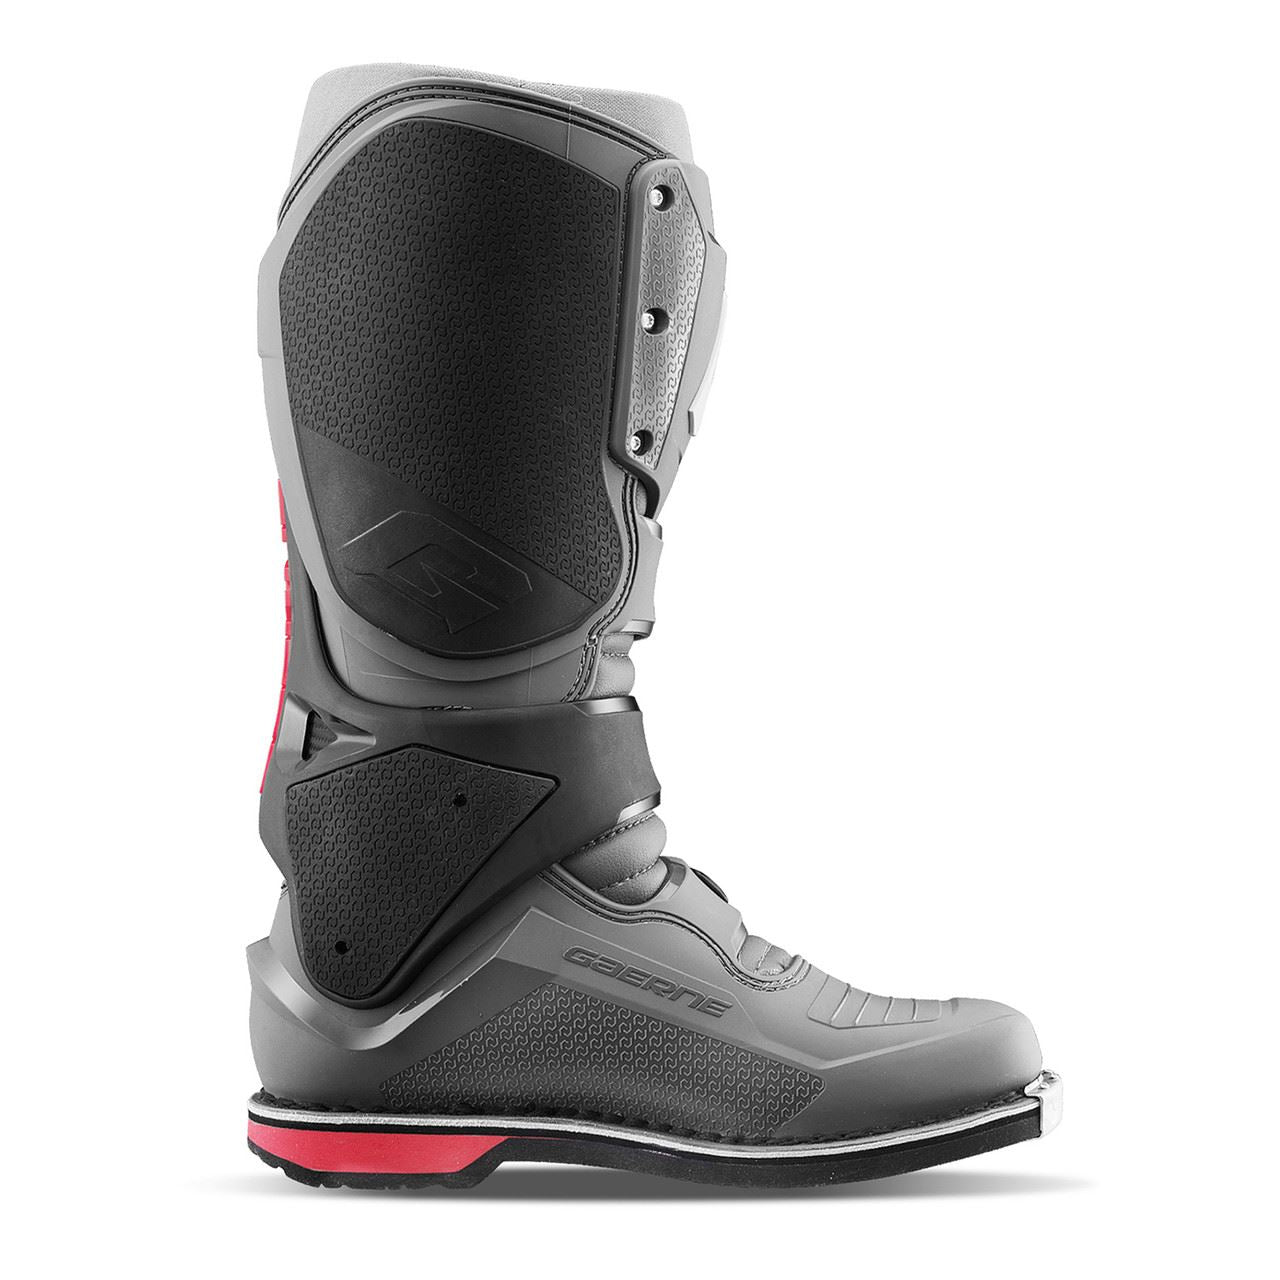 Gaerne SG22 Motocross Boots Anthracite Red